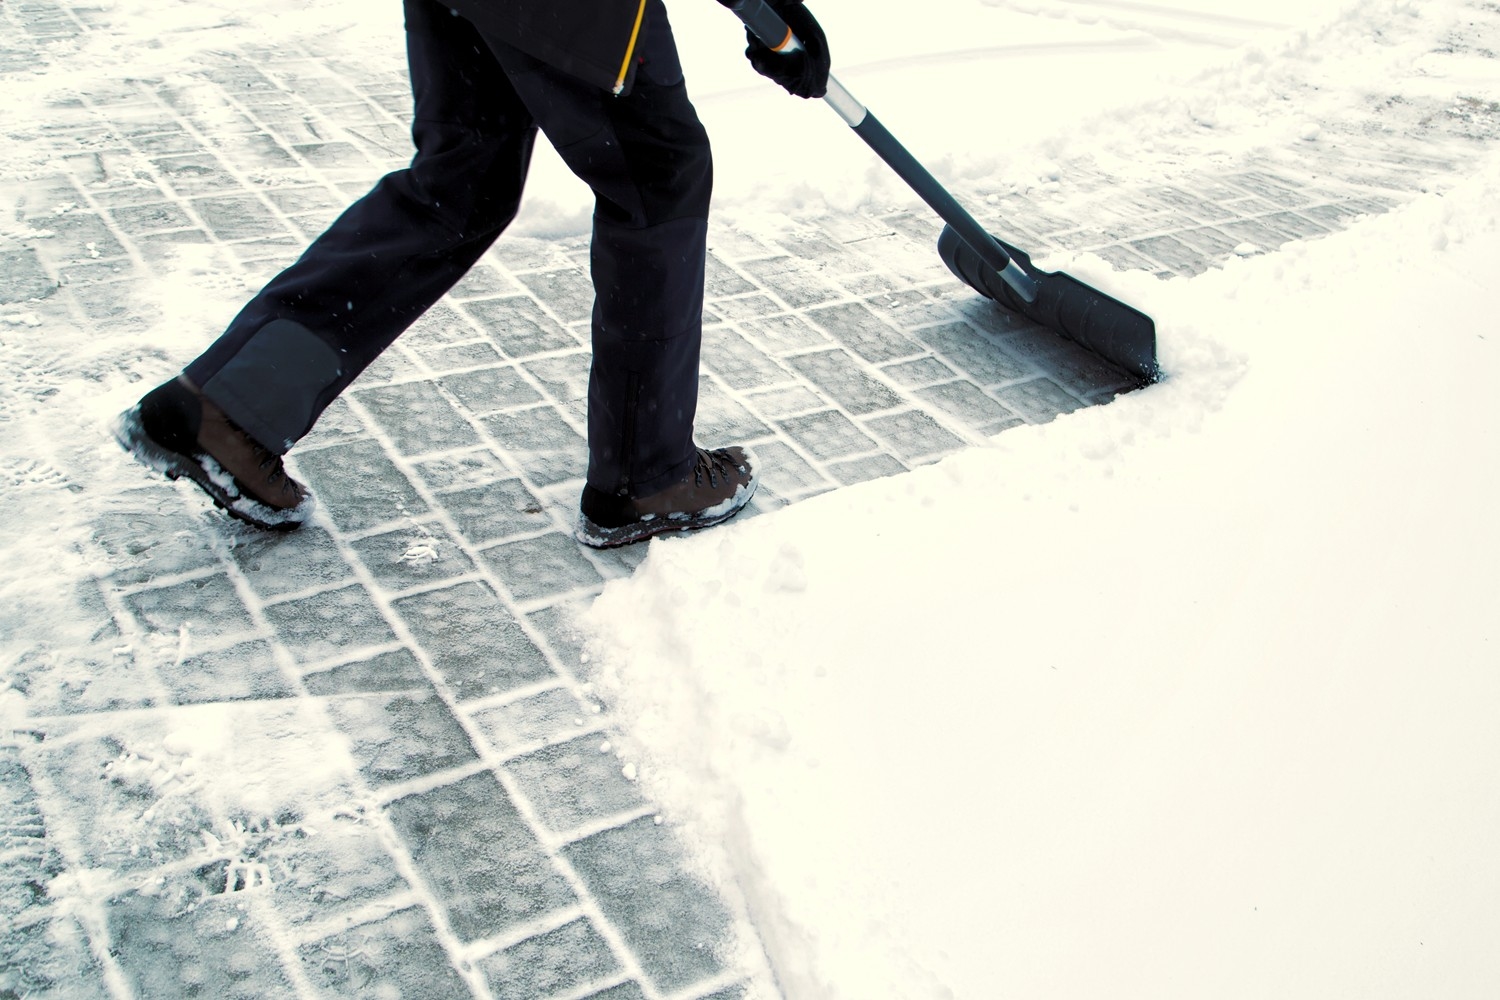 Snow Removal for Business and Commercial Property in Grand Rapids MI - ProMowLandscape.com